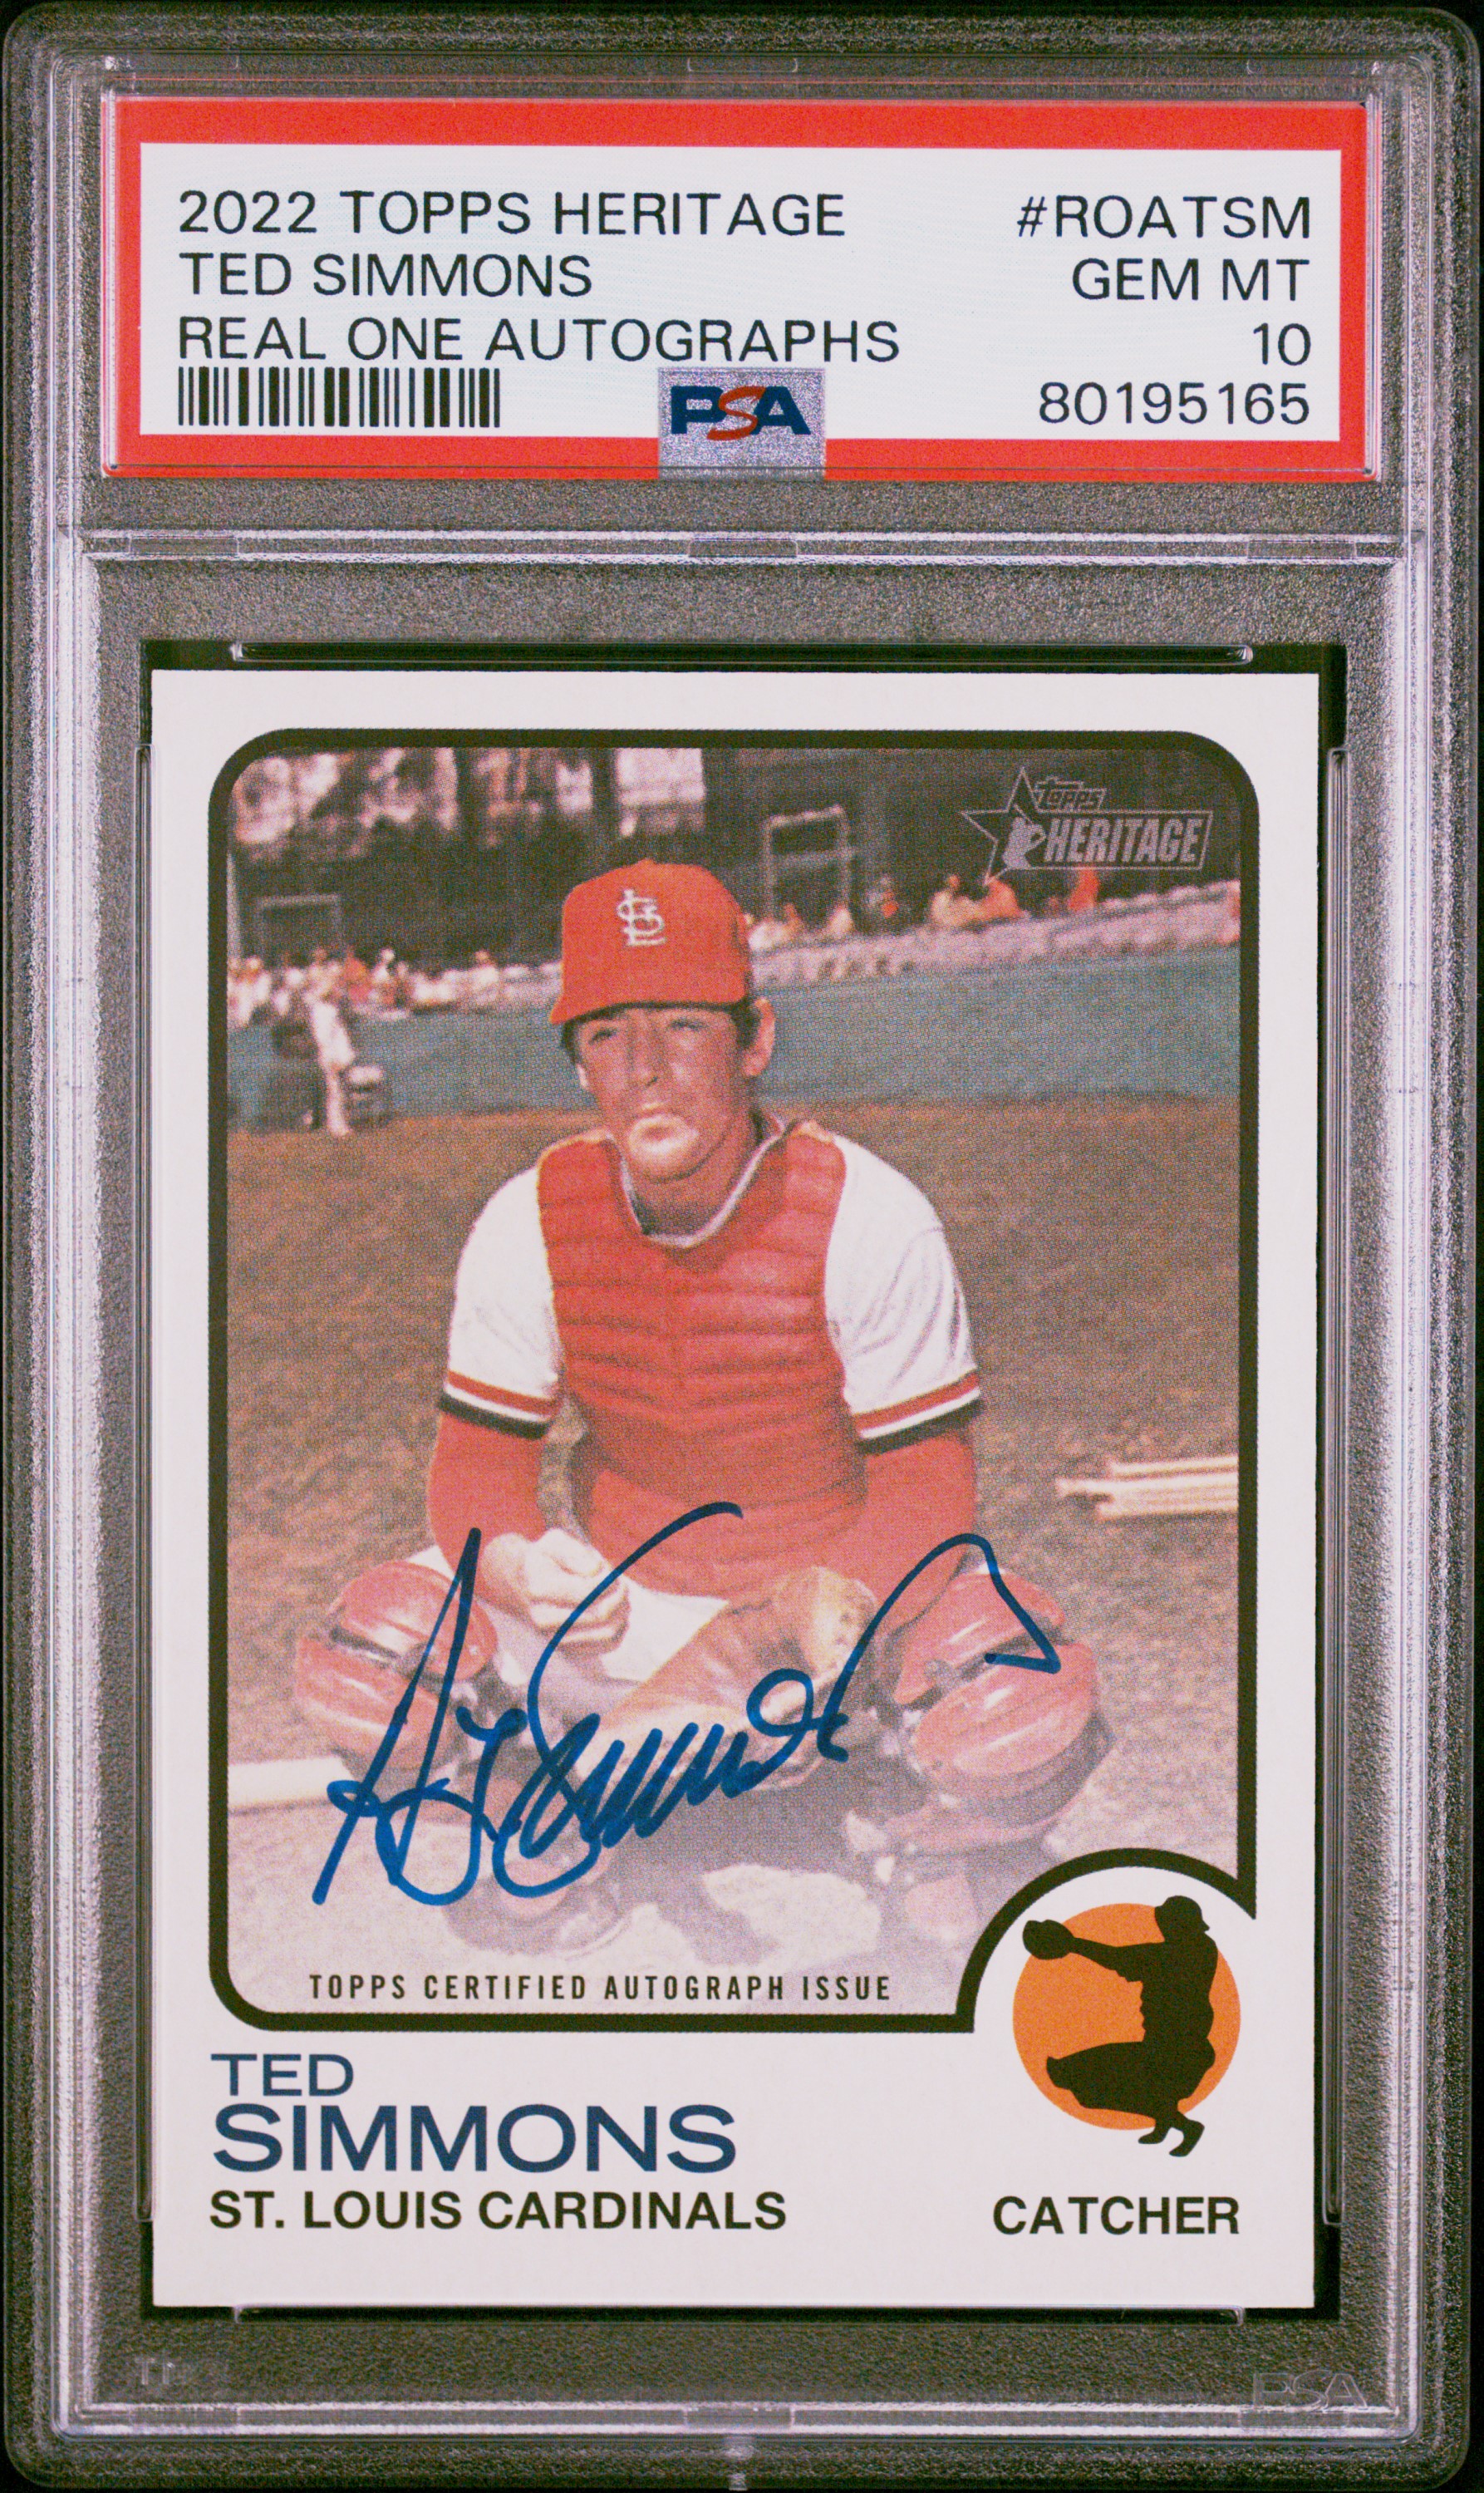 2022 Topps Heritage Real One Autographs #ROATSM Ted Simmons – PSA GEM MT 10